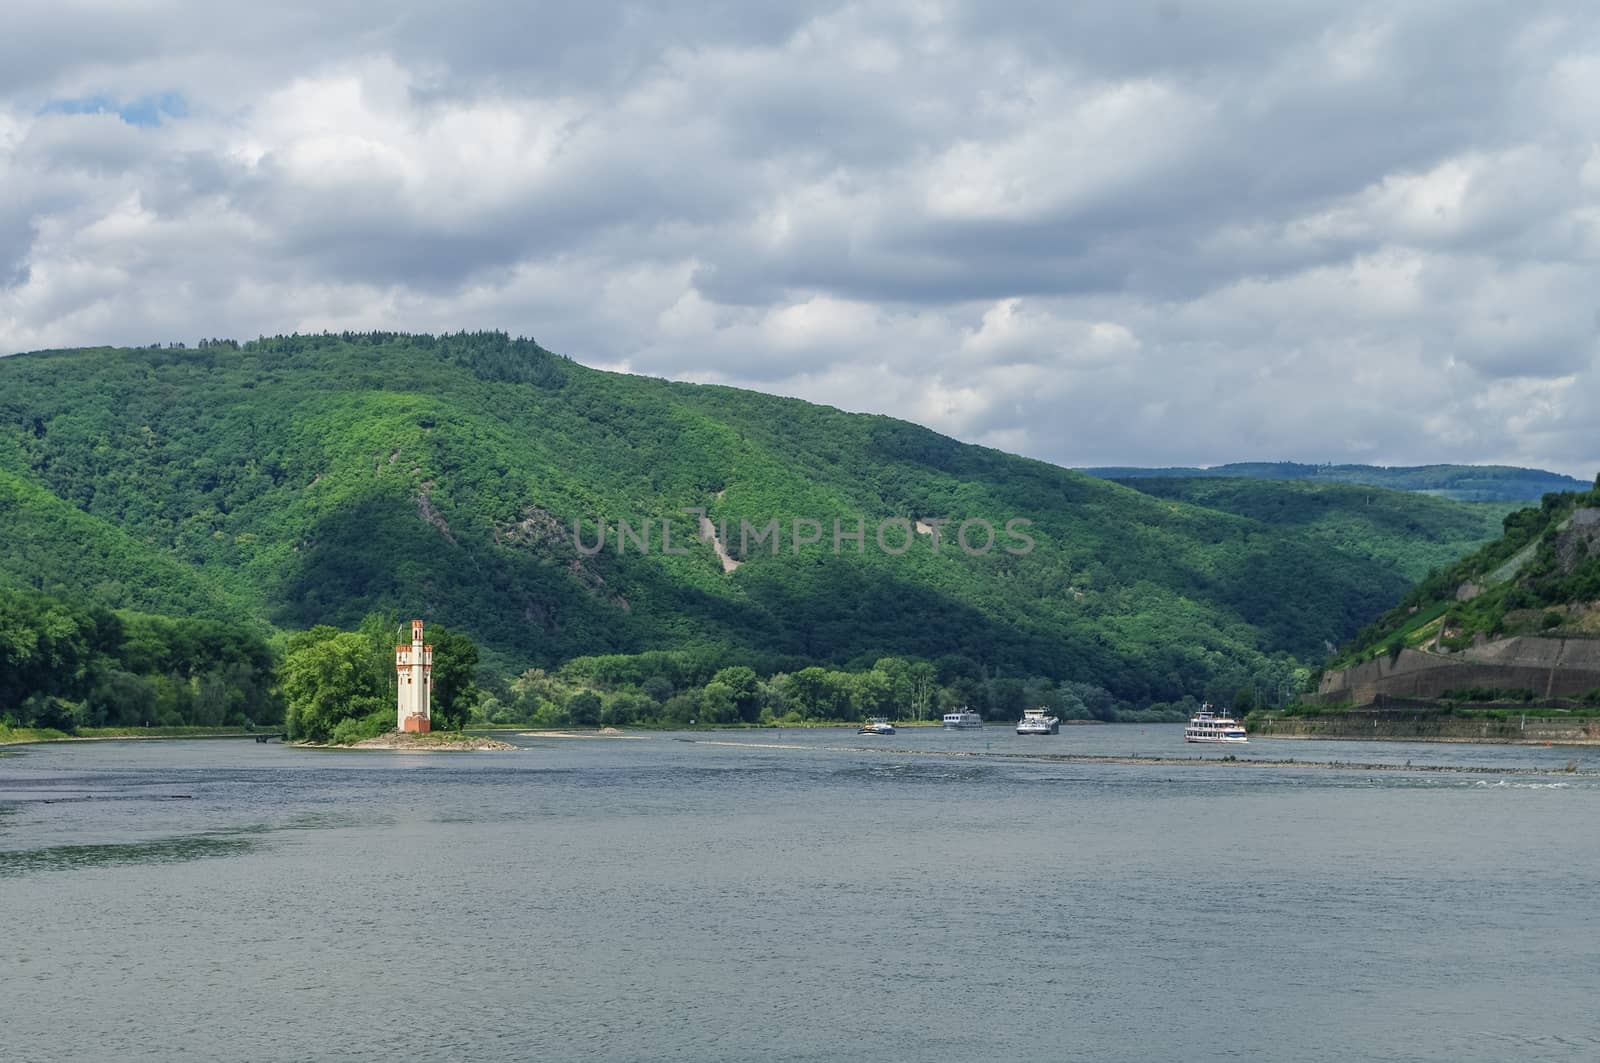 Ship, medieval castle Mouse Tower (Mäuseturm) and vineyards on the slope of Rhine river bank, Bingen am Rhein, Germany by Smoke666